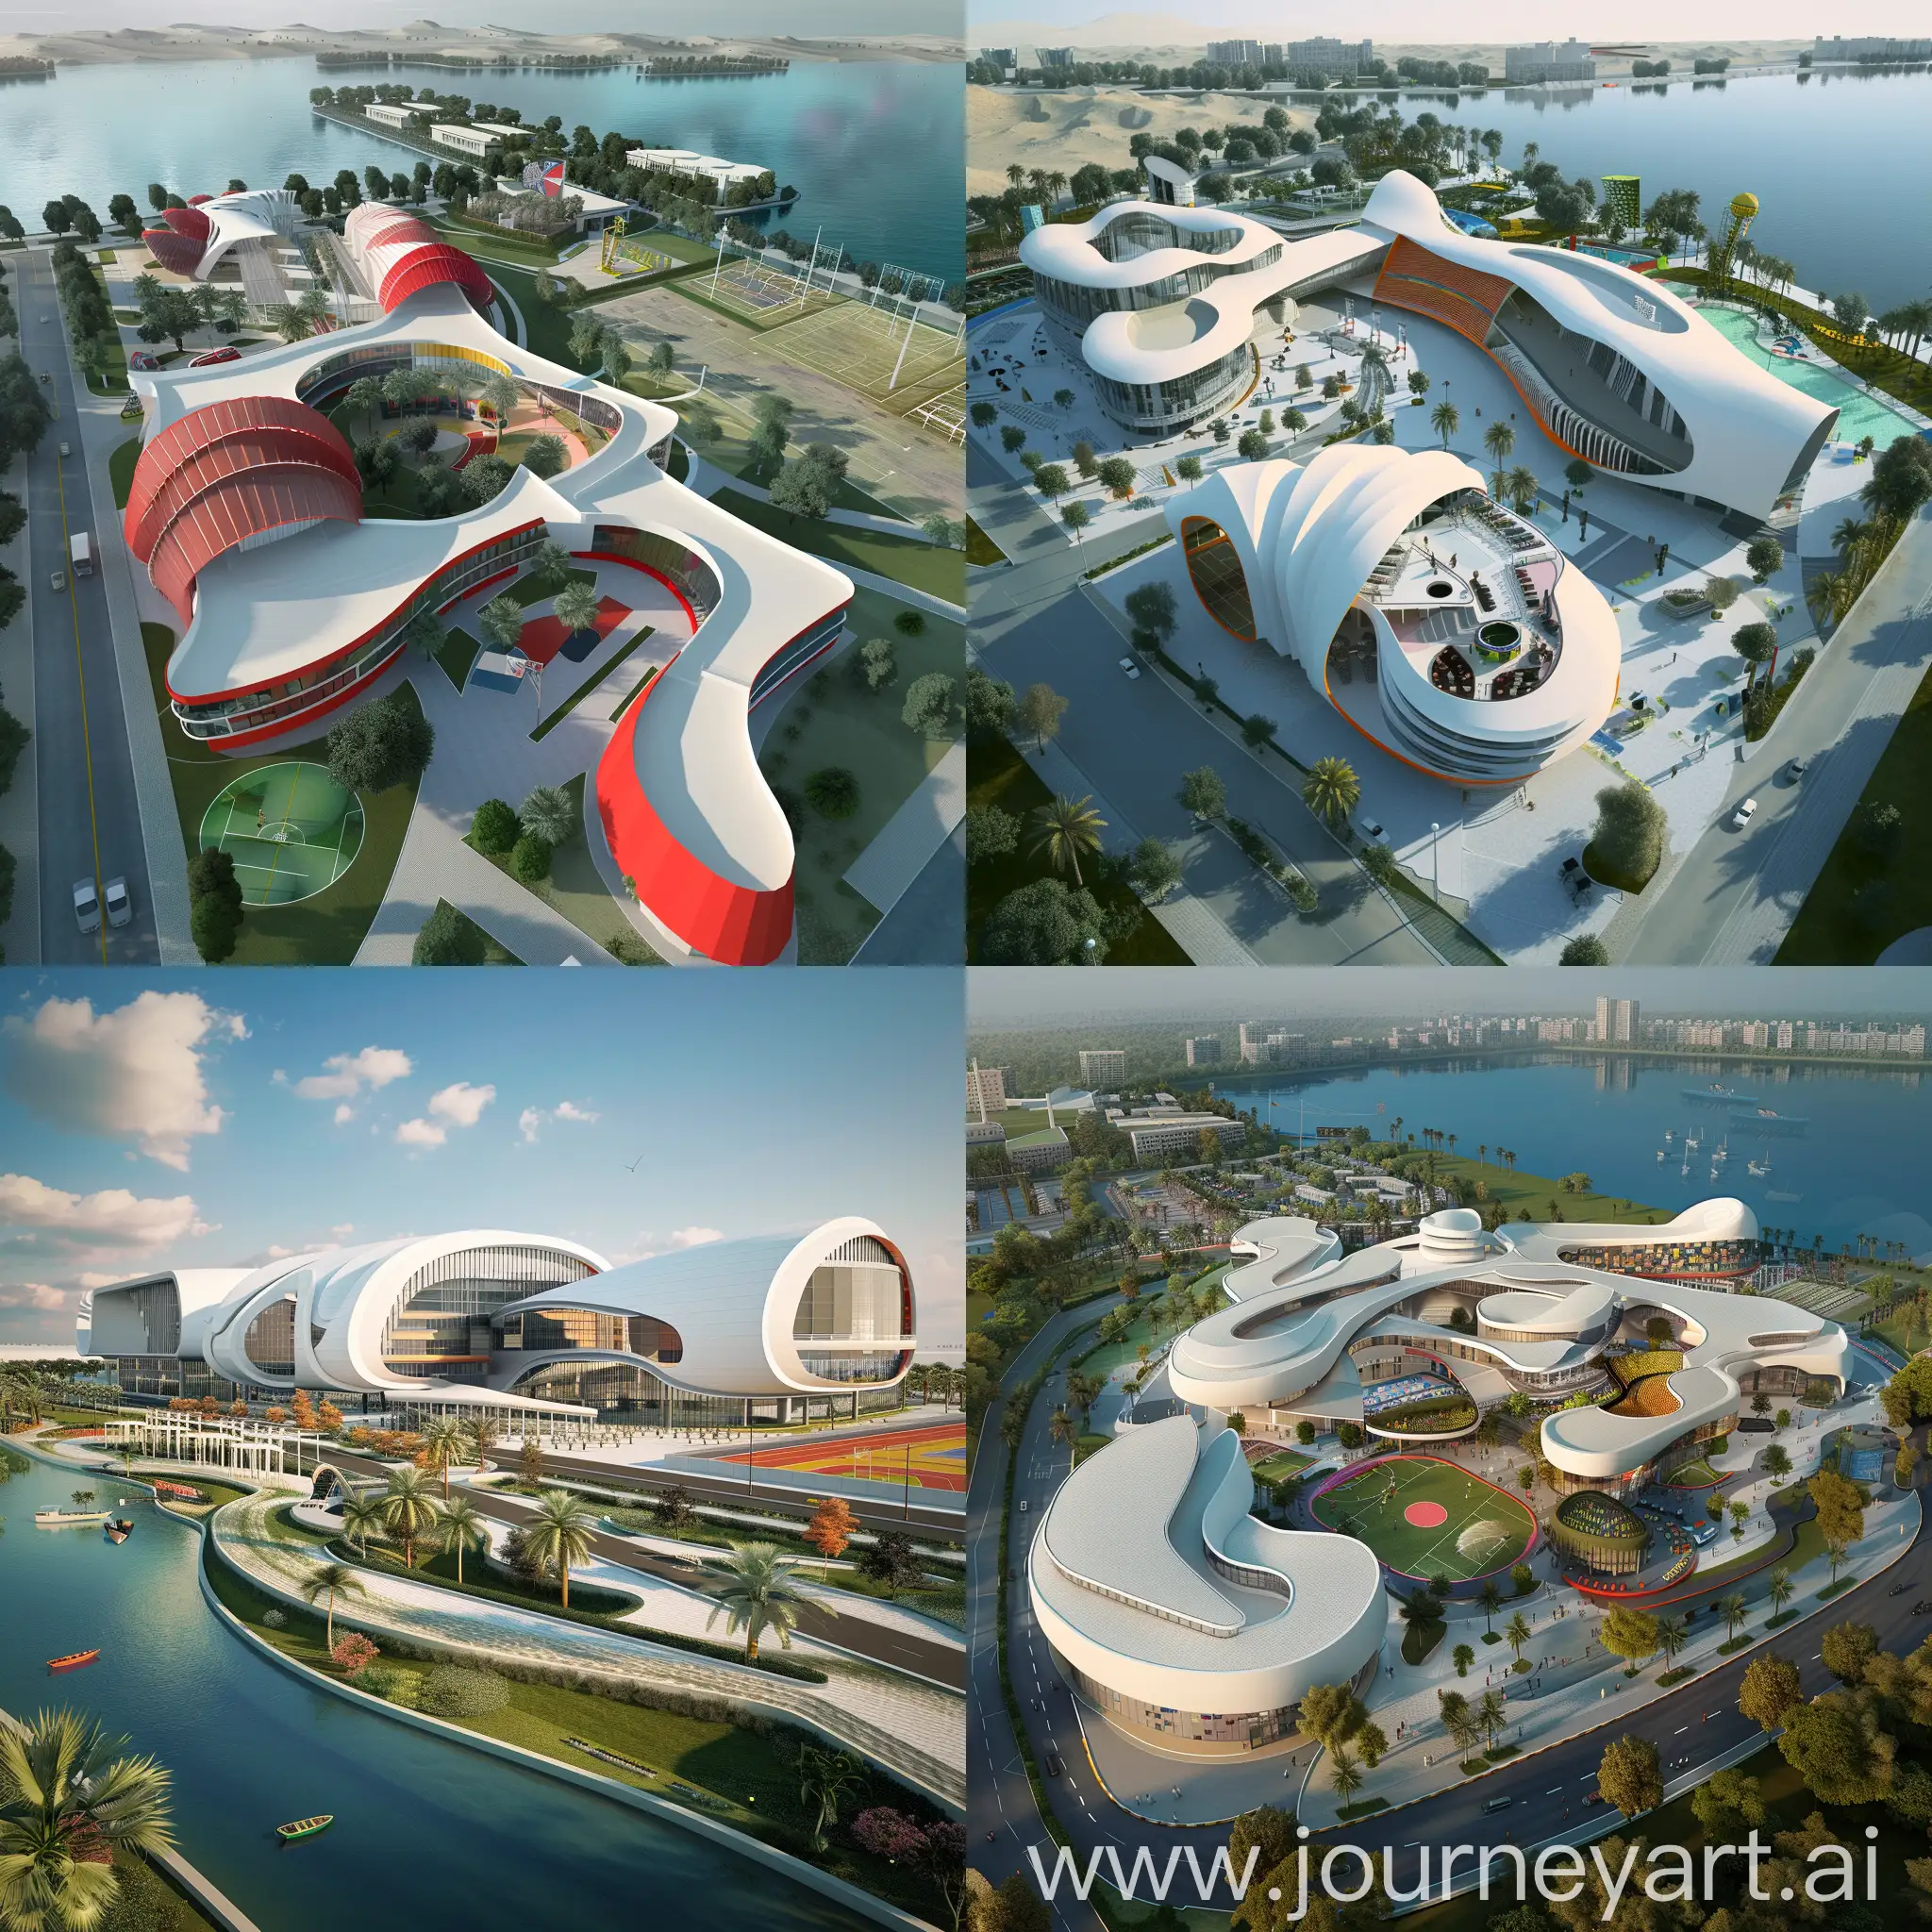 Dynamic-Sports-Center-Complex-Overlooking-Lake-View-AdrenalineInspired-Architecture